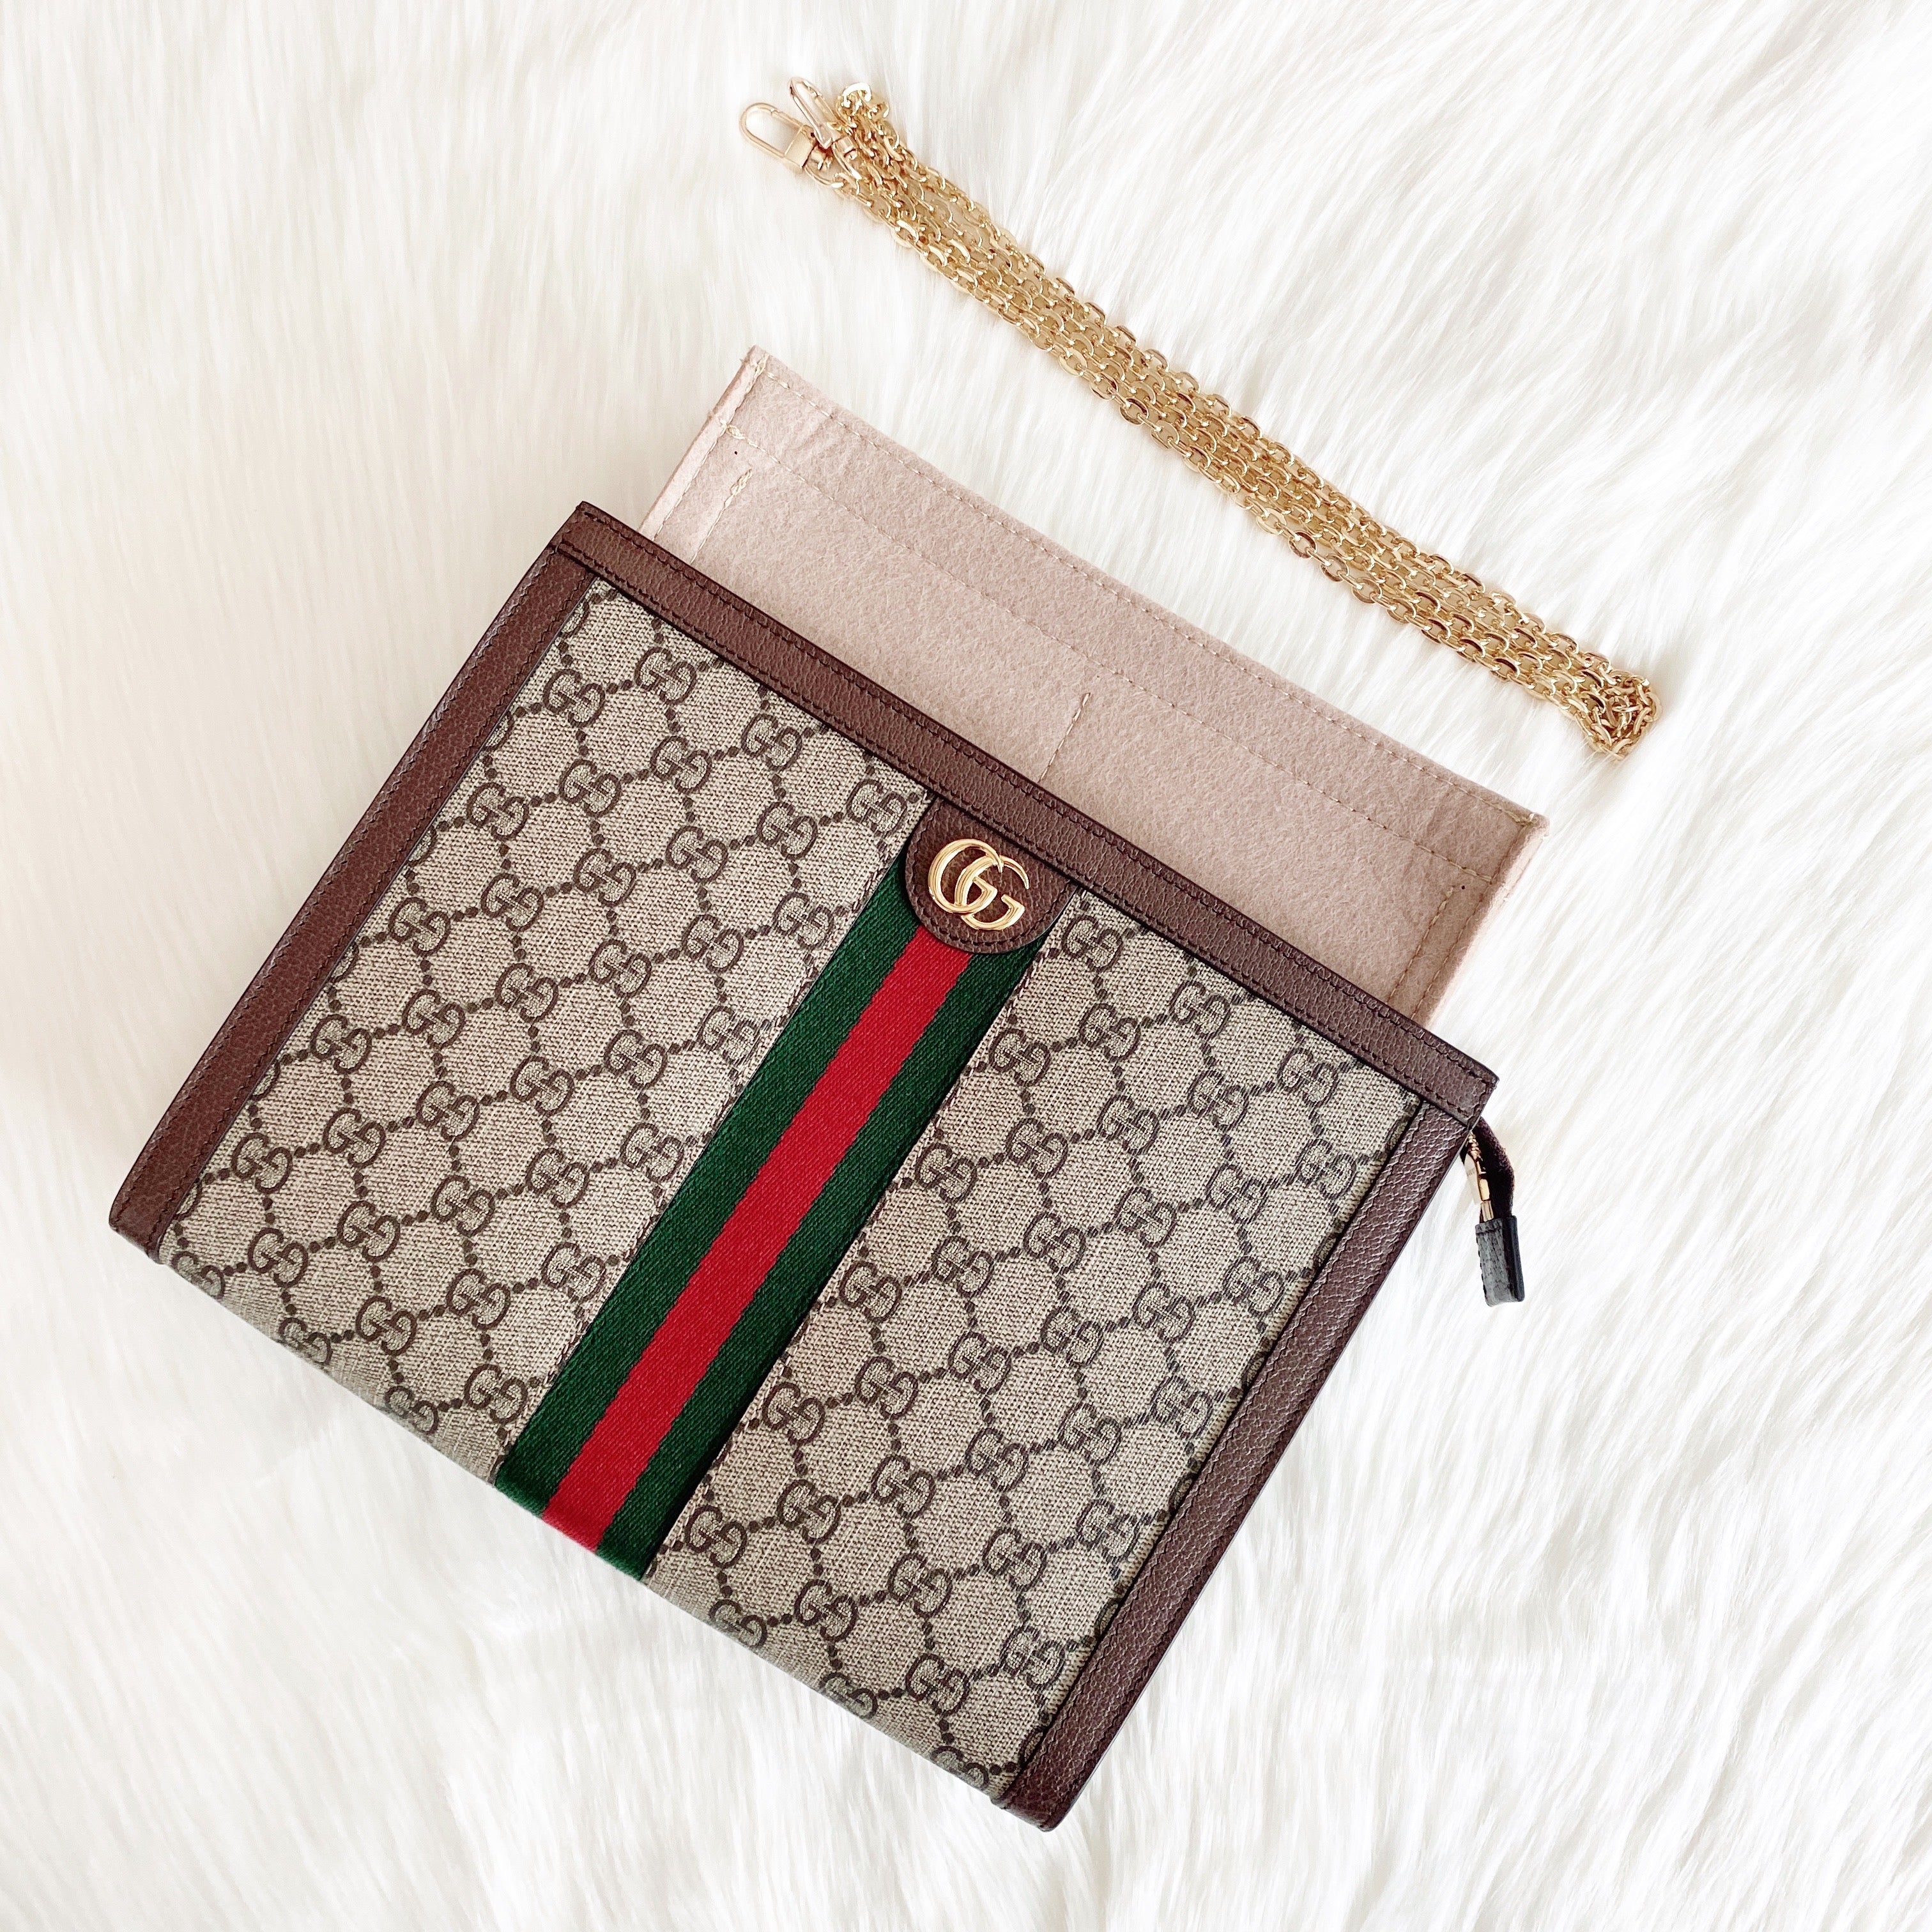 Unboxing Gucci Ophidia GG key pouch  Converting into A Small Crossbody Bag  